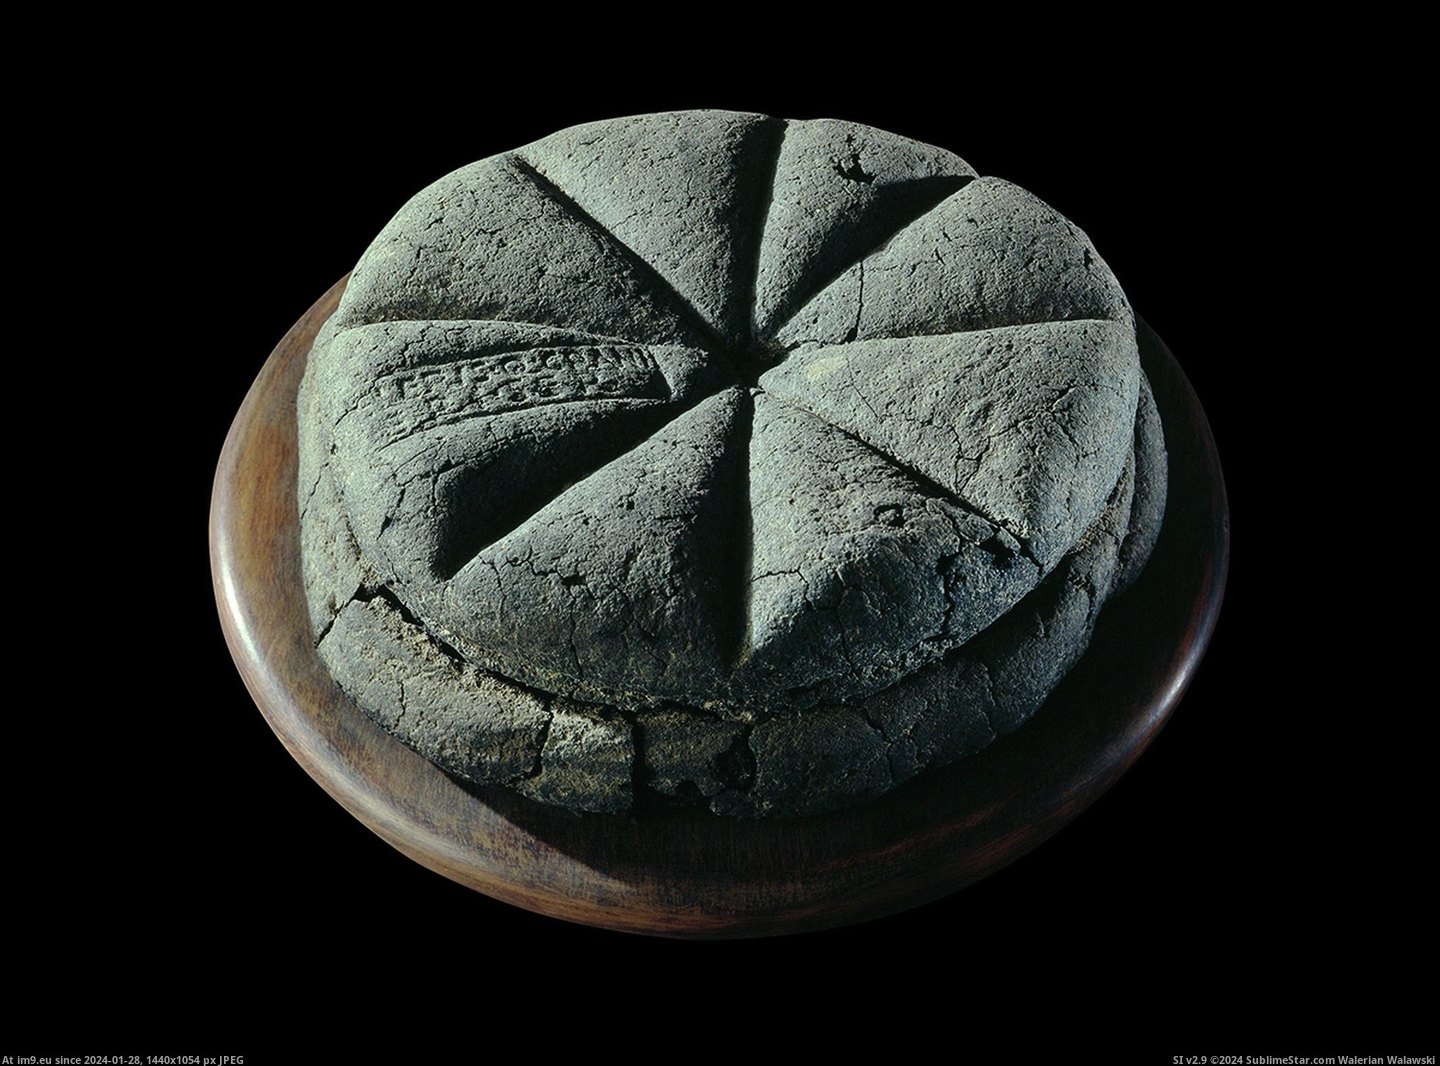 #Pompeii #Loaf #Carbonised #Bread [Pics] A carbonised loaf of bread from Pompeii Pic. (Изображение из альбом My r/PICS favs))